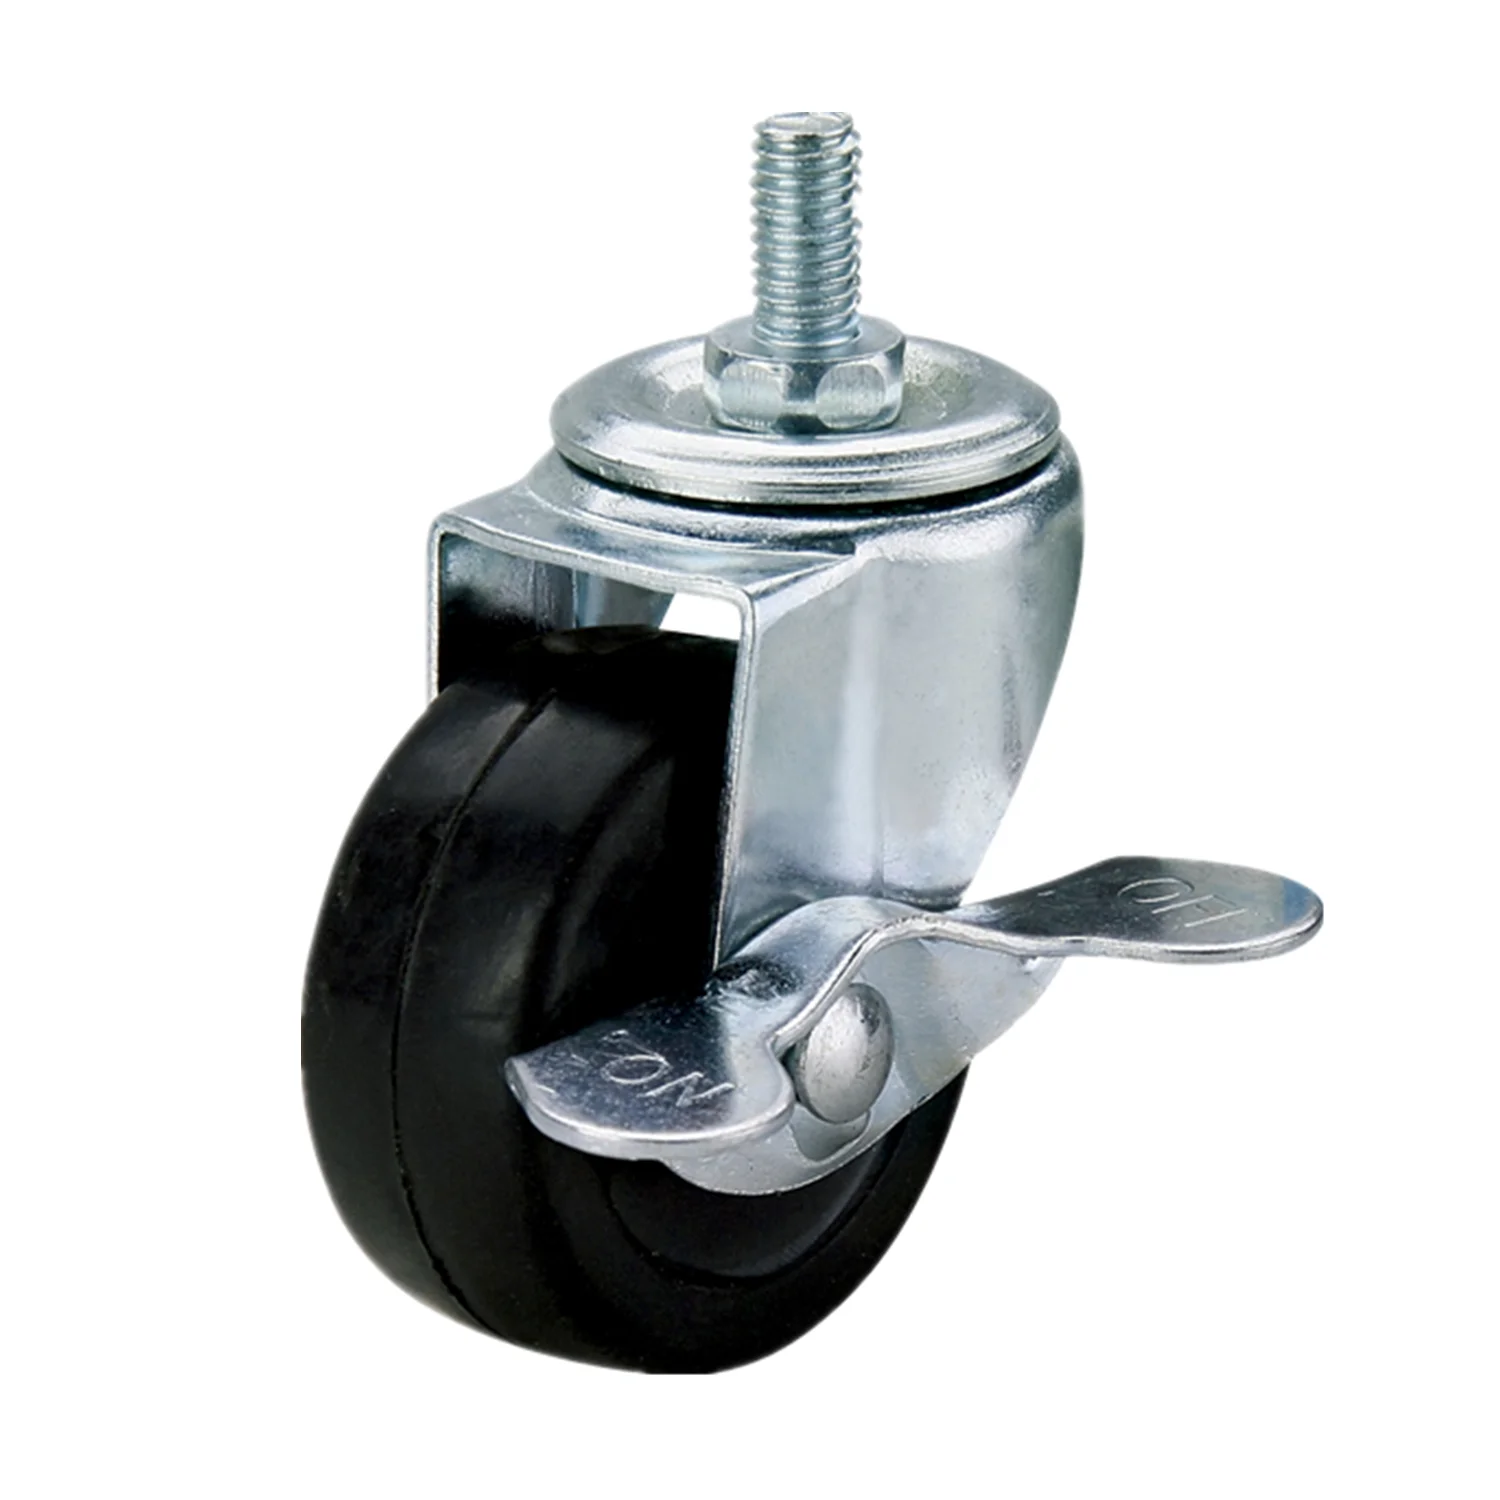 1" 1.25" 1.5" 2" 2.5" 3" Chinese Manufacturing Furniture Swivel Top Plate Black Rubber Wheel Casters